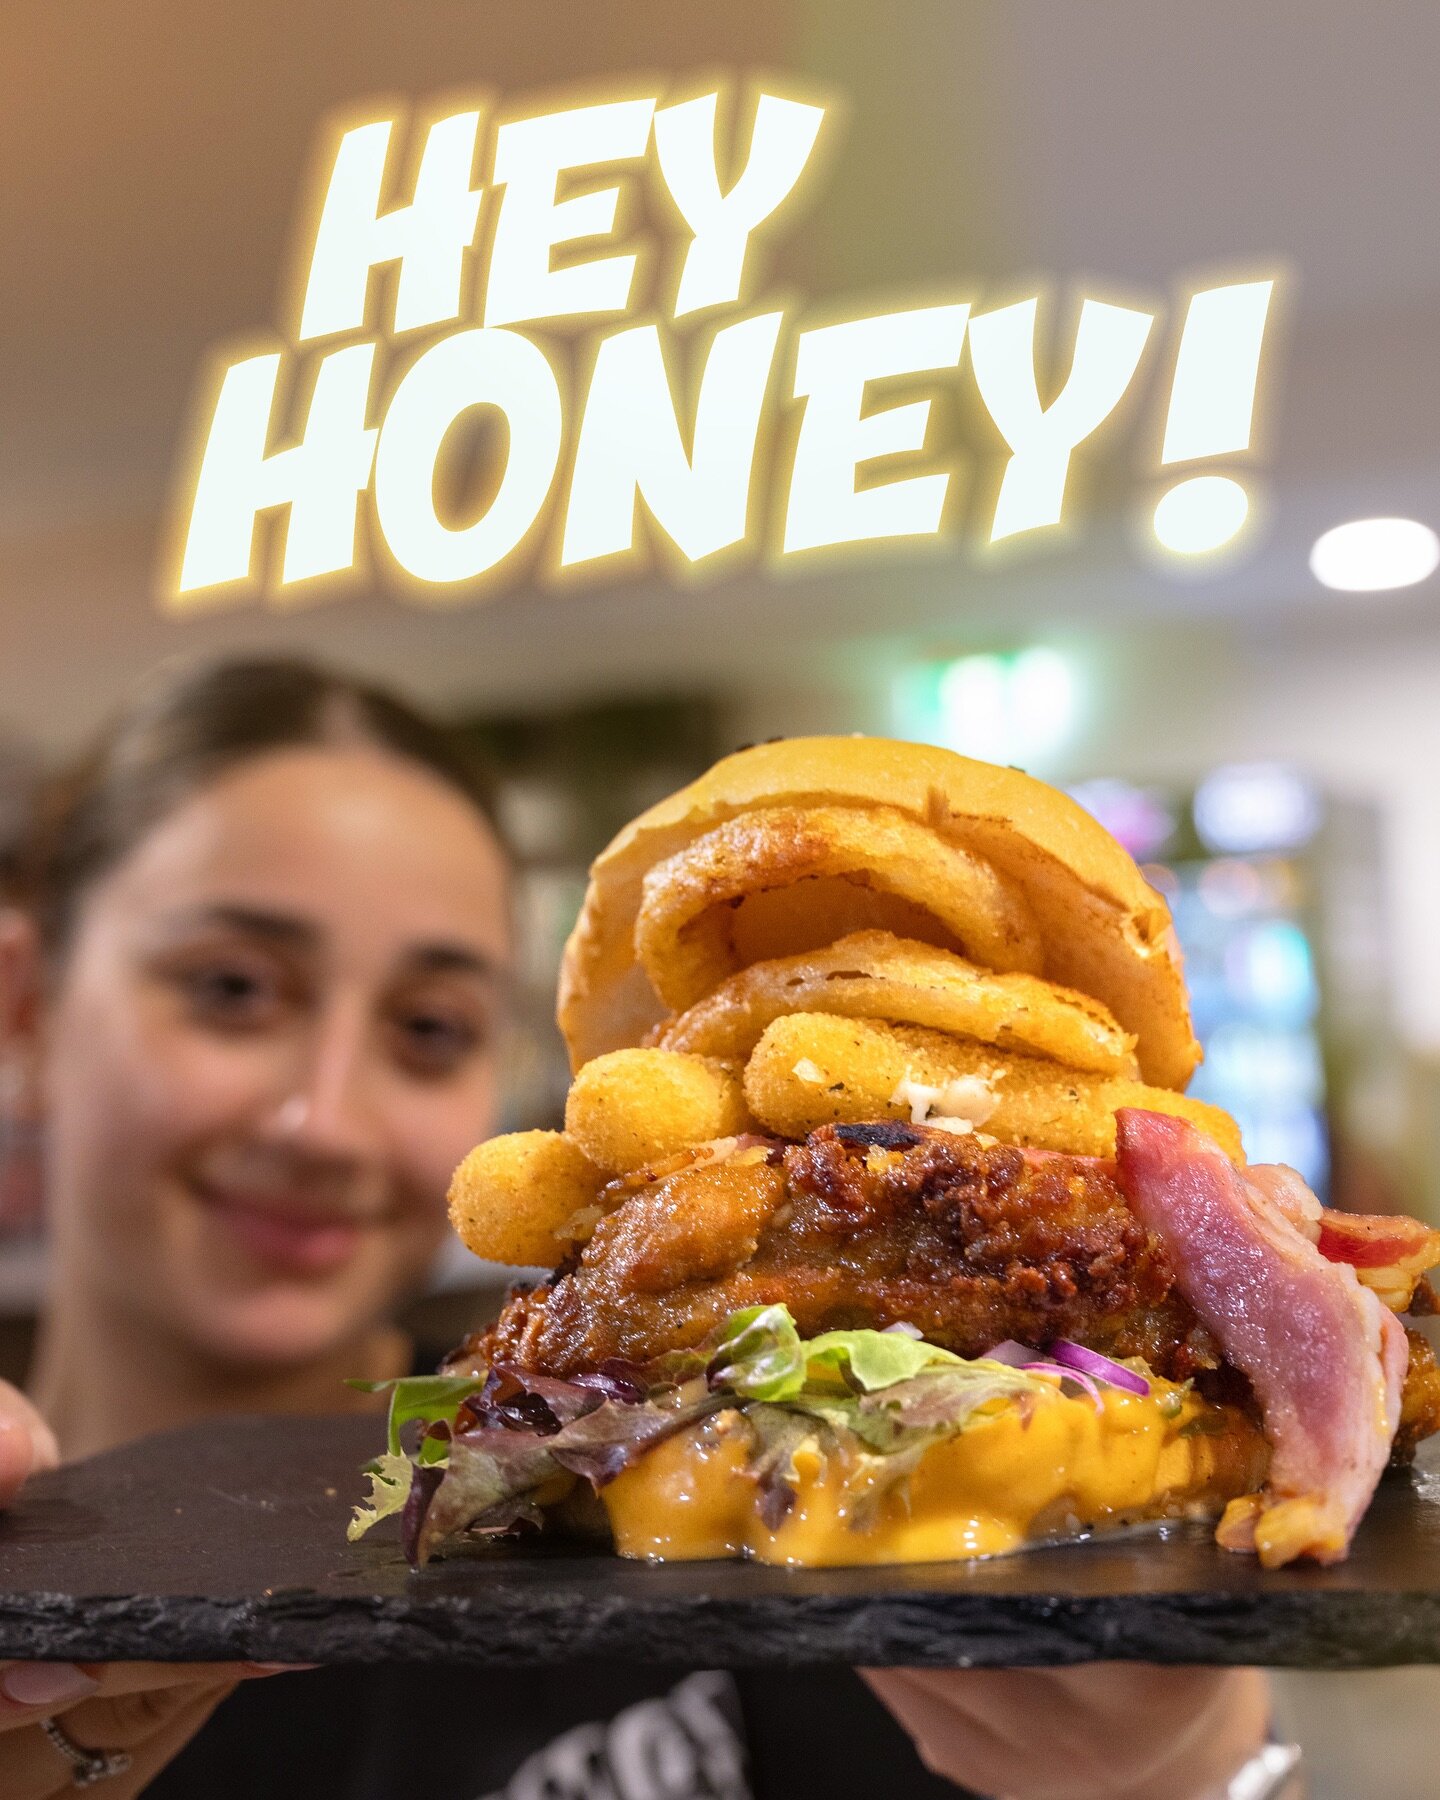 🍔 of the week!
The one with the sweet honey chicken 🍯 😊

#burger #foodie #honeychicken #gregoryhills